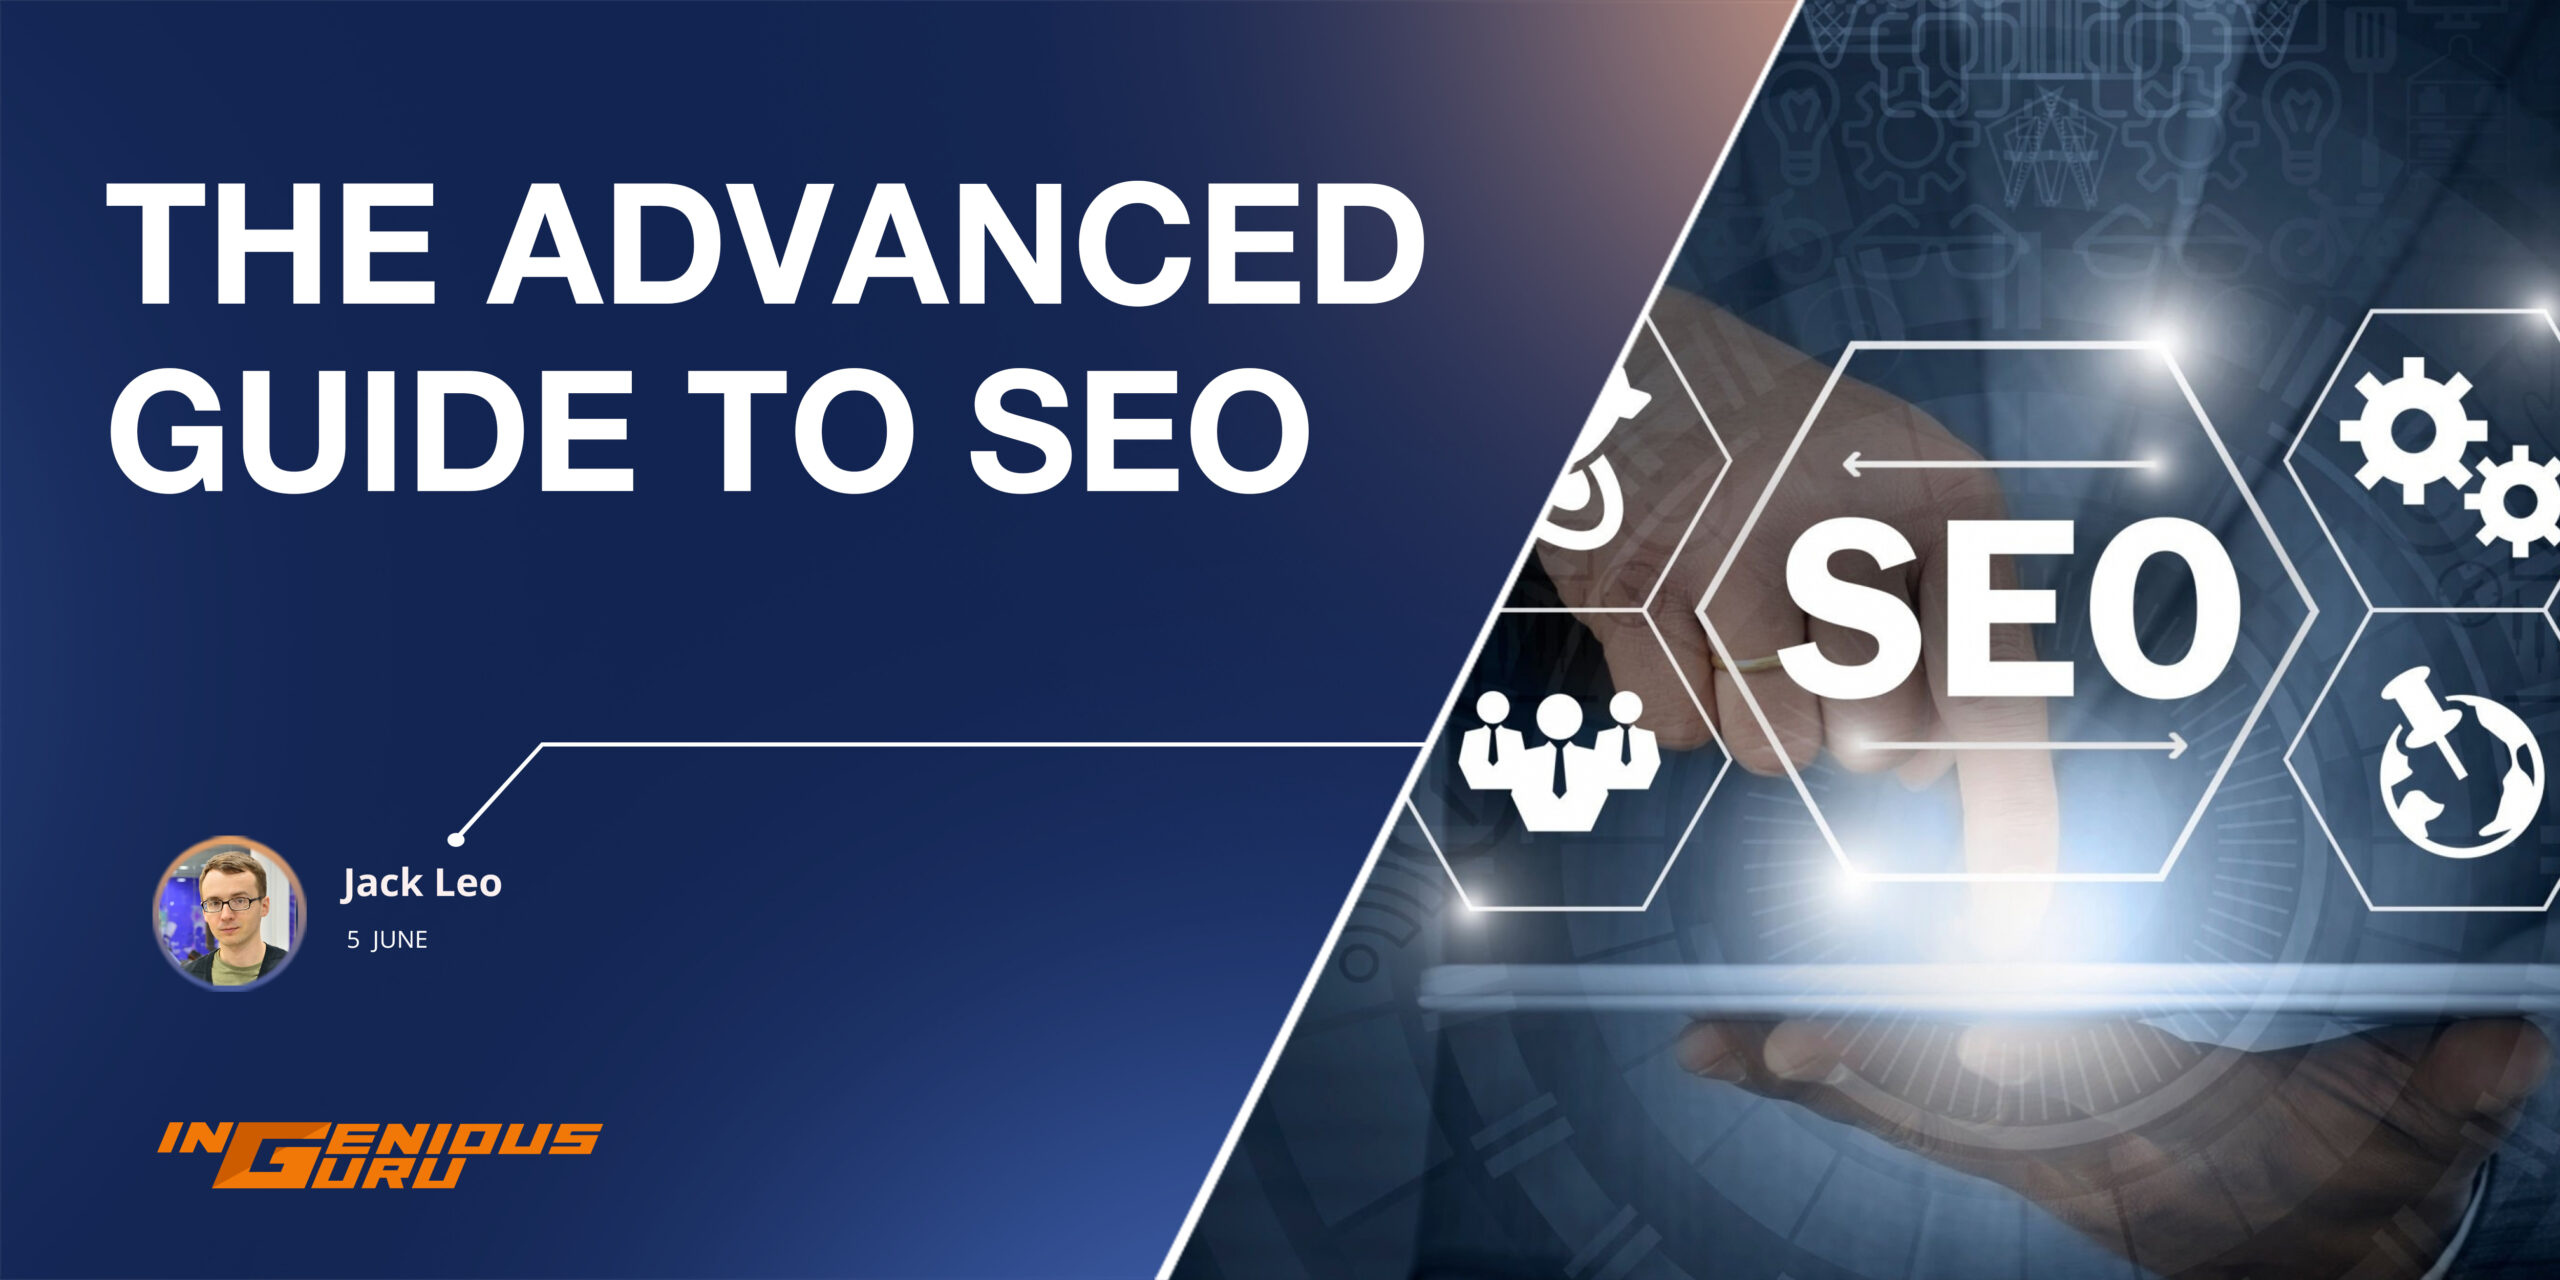 The Advanced Guide to SEO